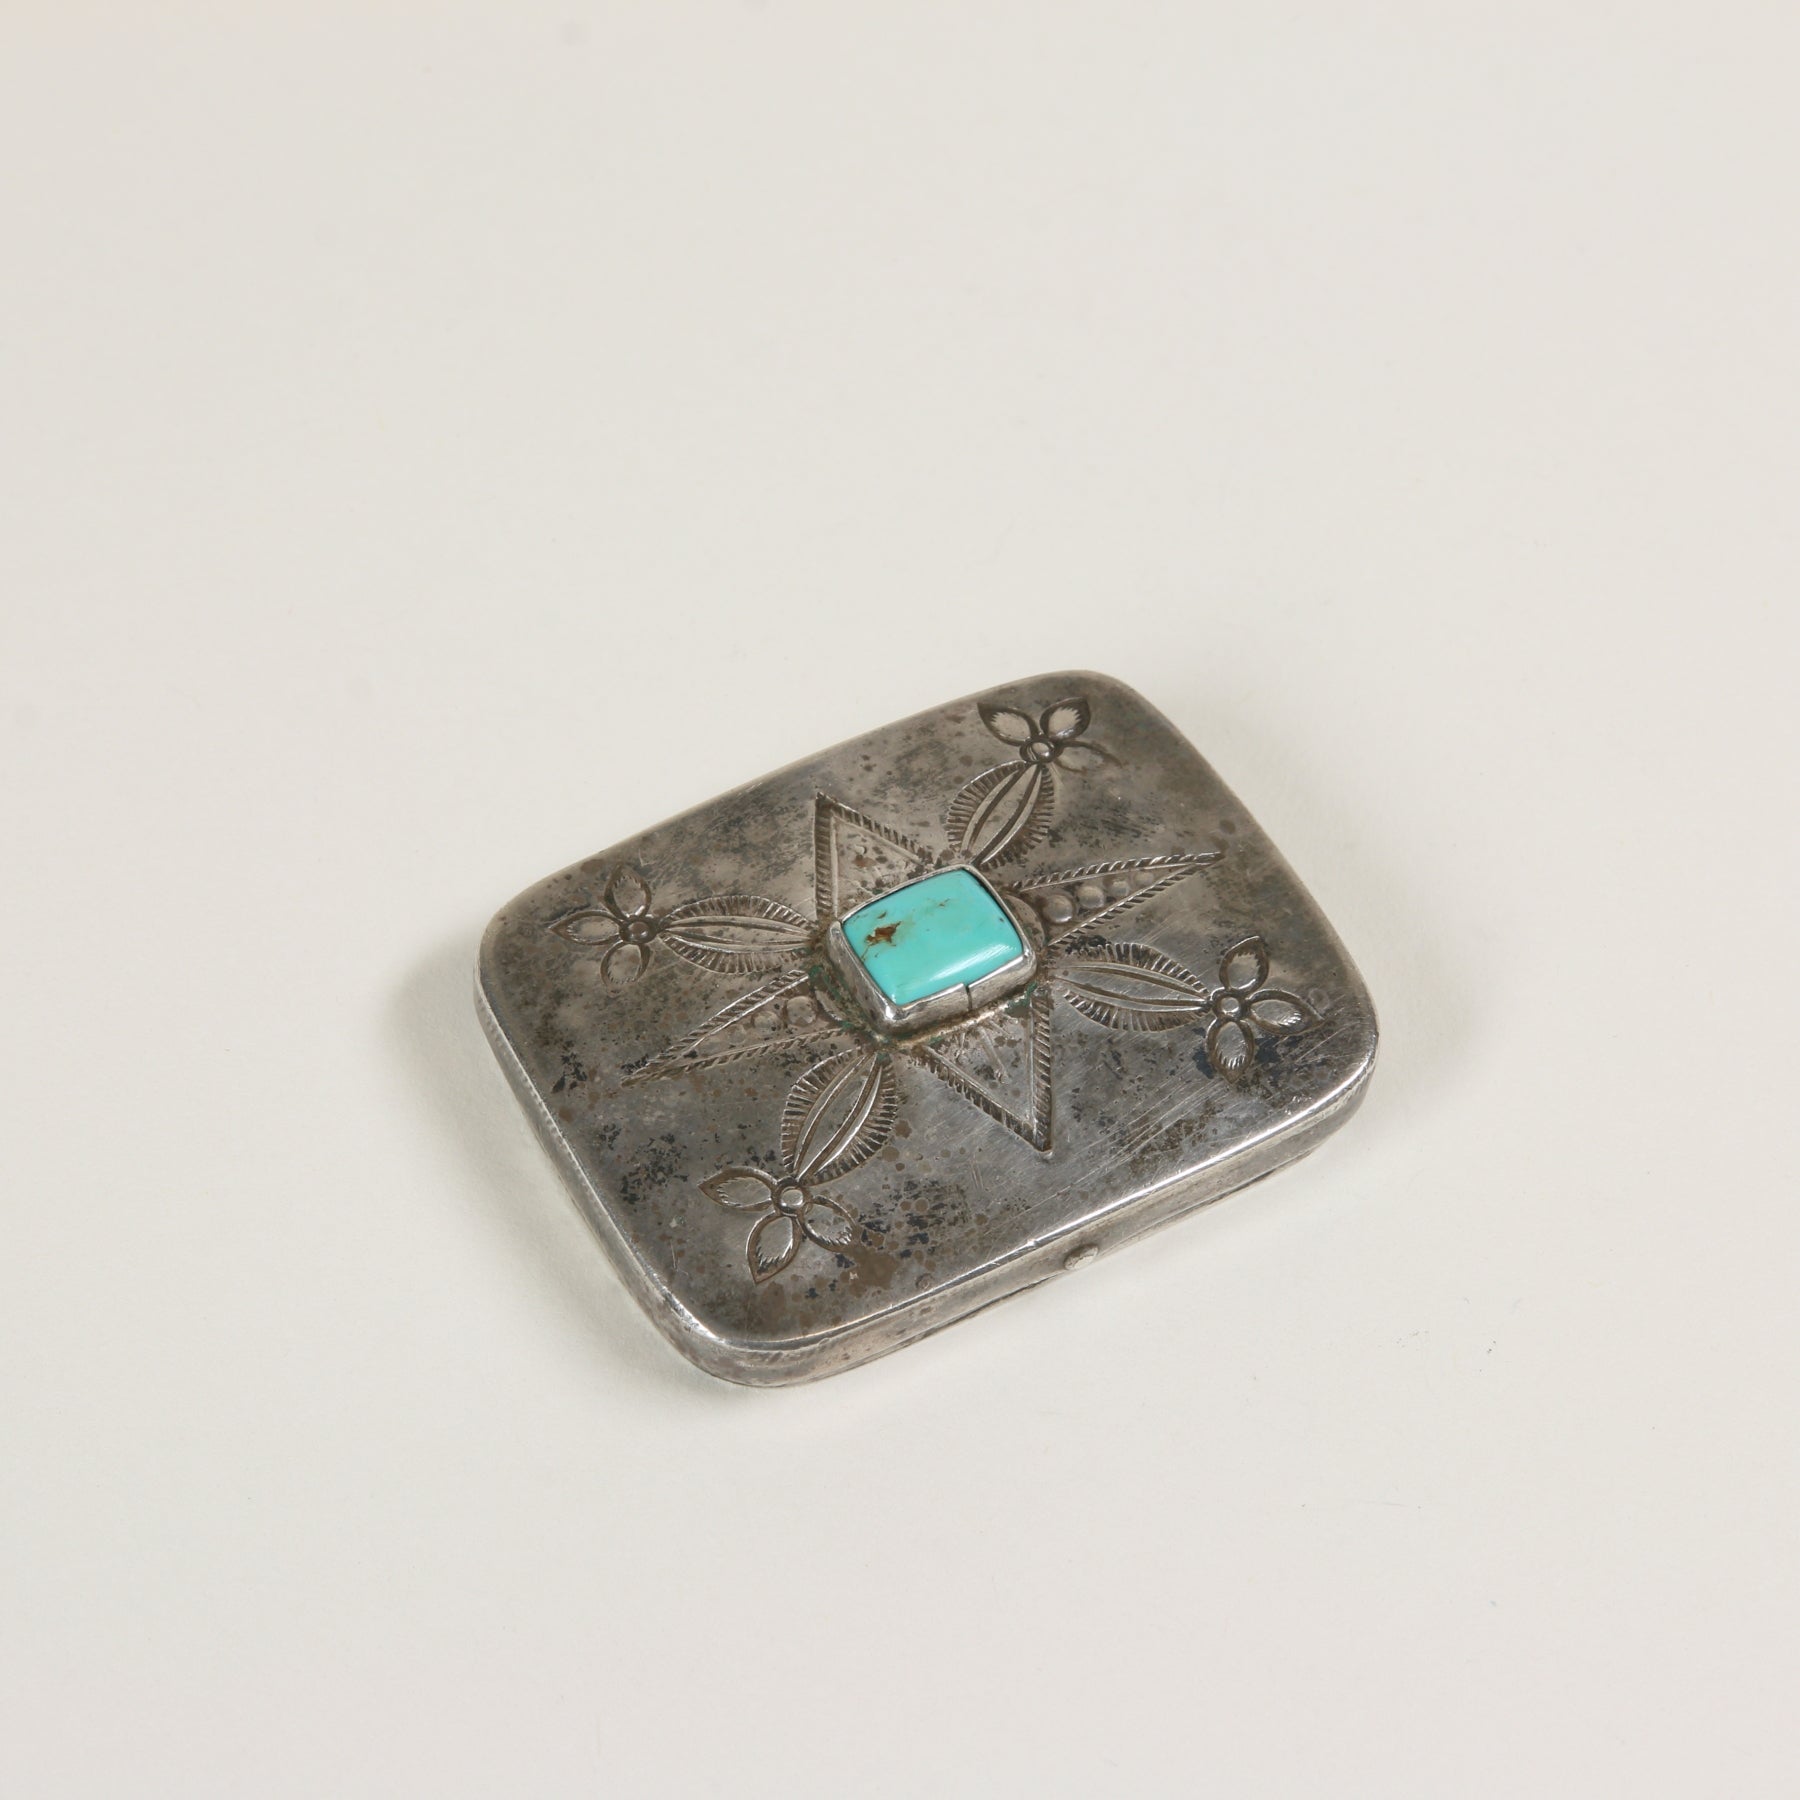 1940s Navajo Sterling Silver Pill Case with Turquoise - HIKOs